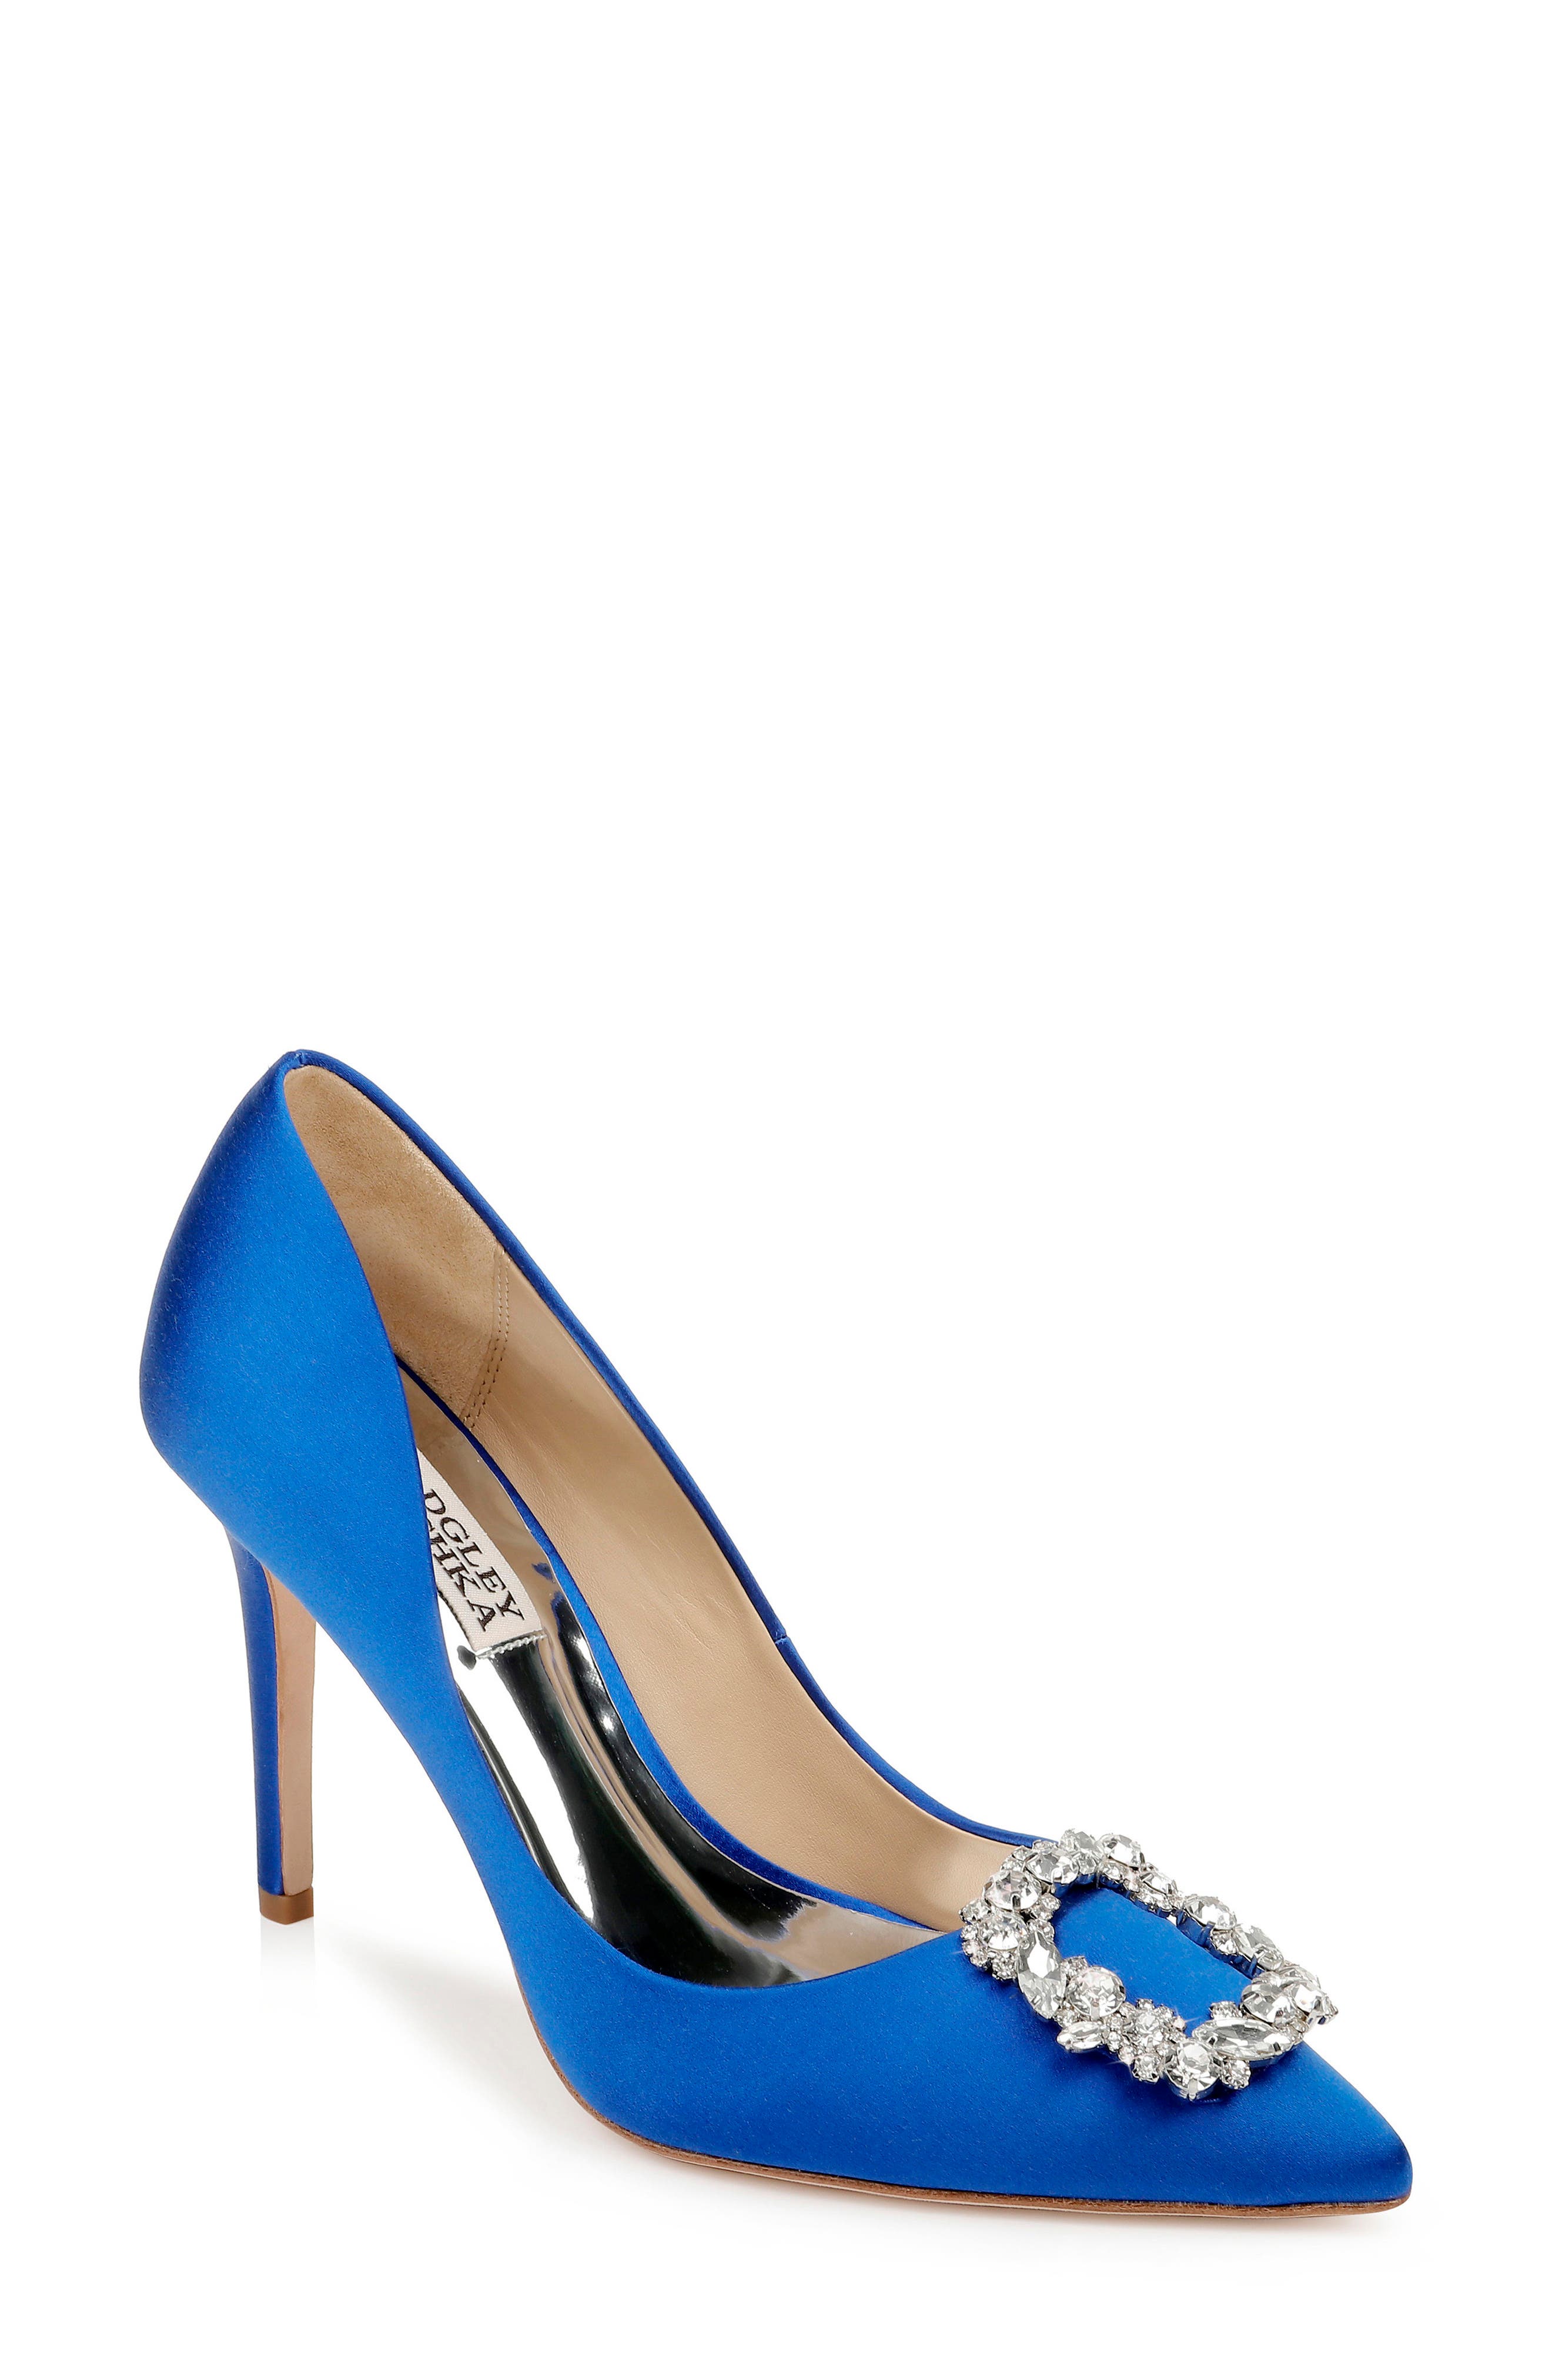 Badgley Mischka Collection Cher Crystal Embellished Pump in Electric Blue Satin